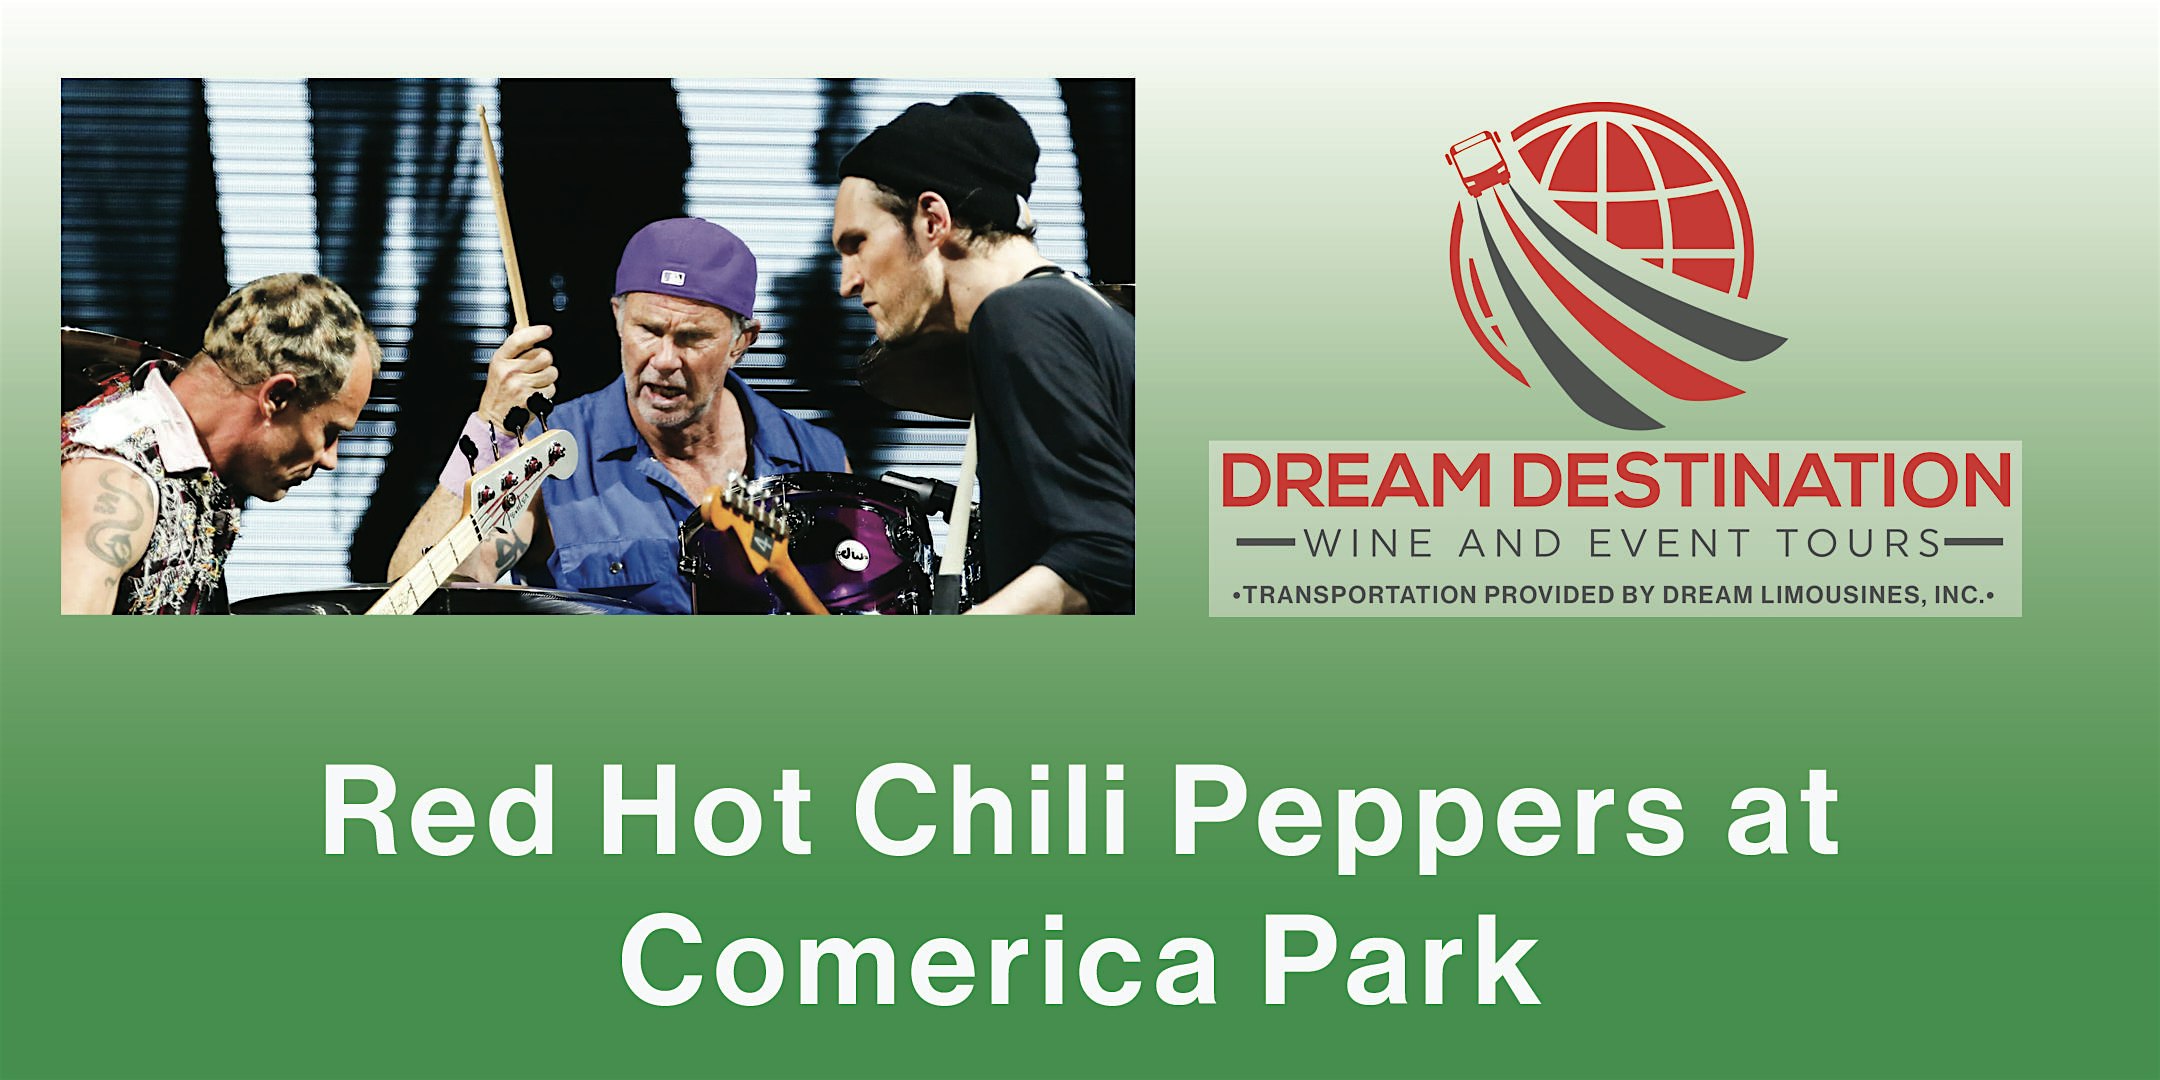 Shuttle to See Red Hot Chili Peppers at Comerica Park